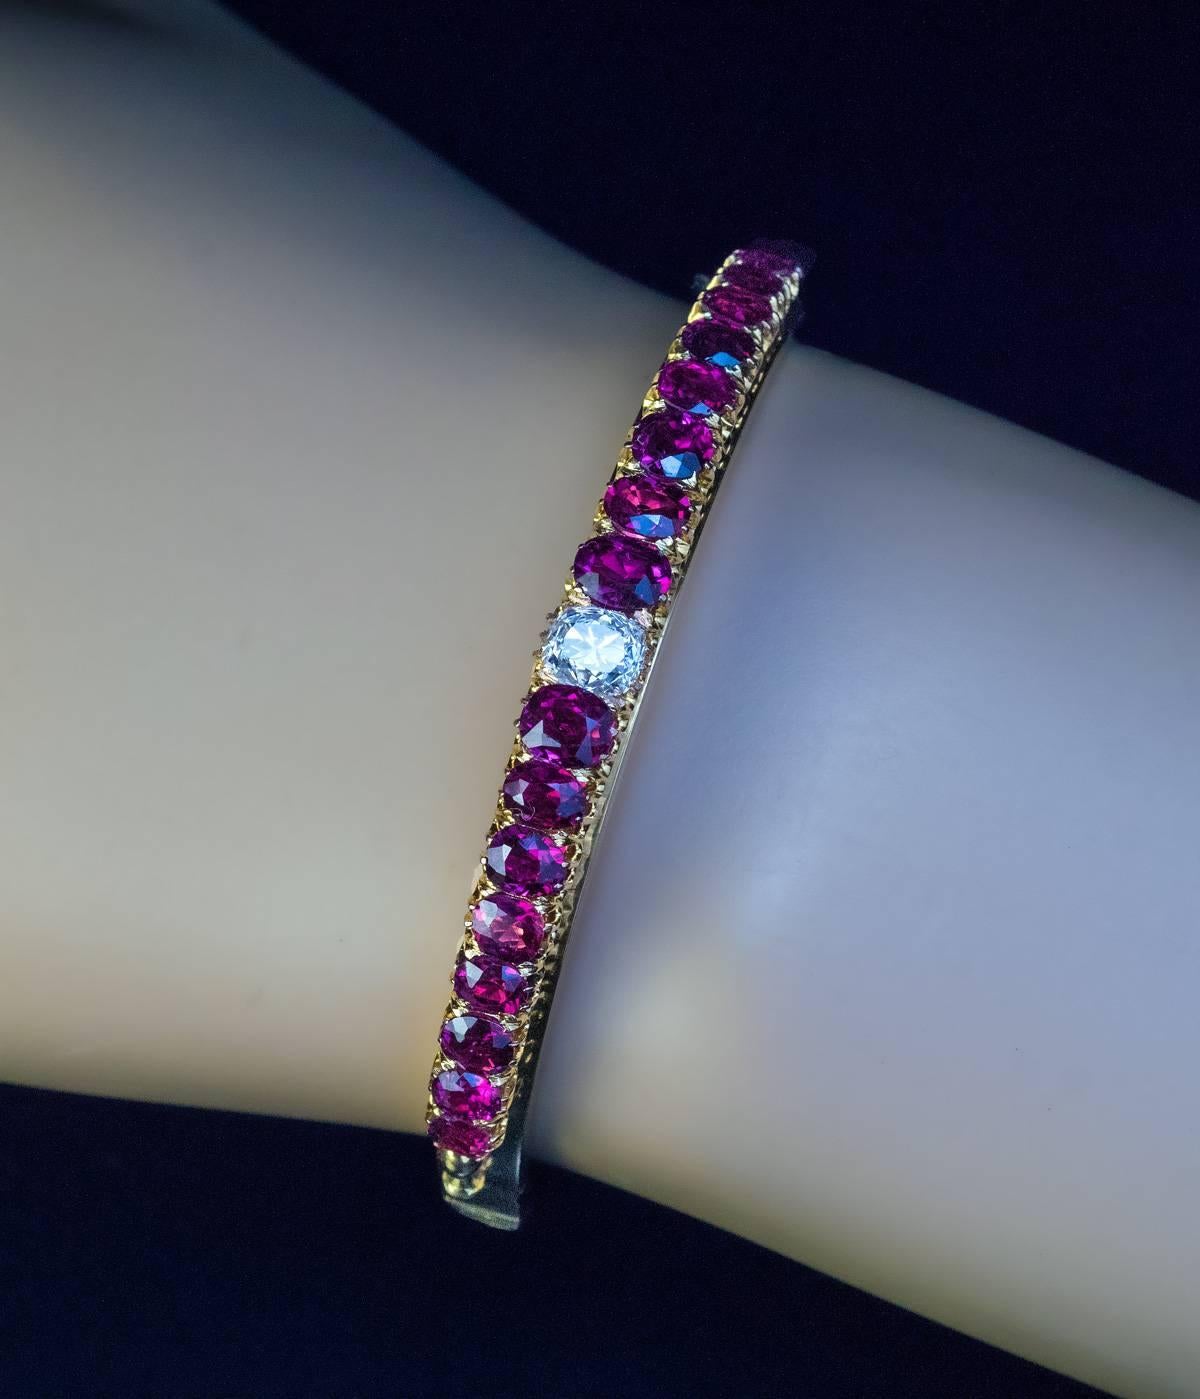 Russian, made in St. Petersburg in the 1890s
An antique 14K gold bangle bracelet is centered with an old cushion cut diamond (5.8 x 4.9 mm, approximately 0.90 ct, H color, VS2 clarity) flanked by well-matched cranberry red Thai rubies (estimated